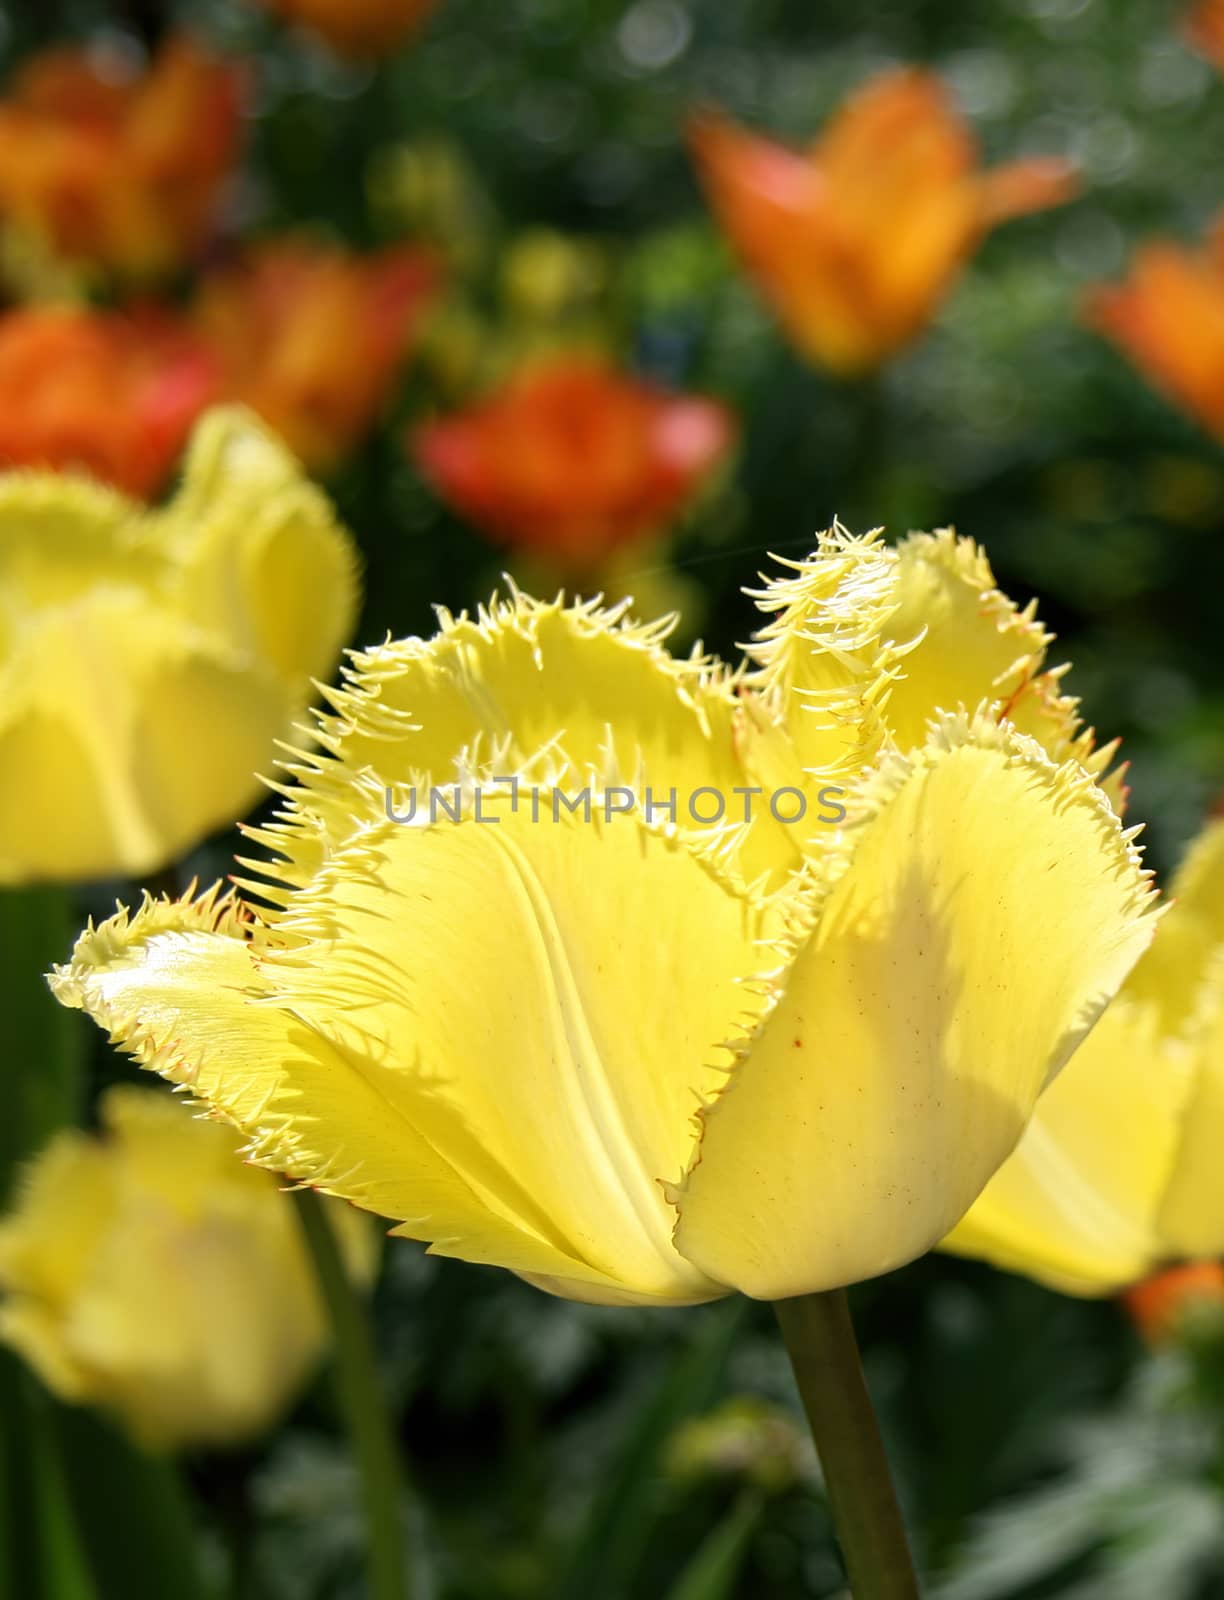 Beautiful yellow tulips with green leaves. Spring flowers bloom in the garden. Natural floral background.